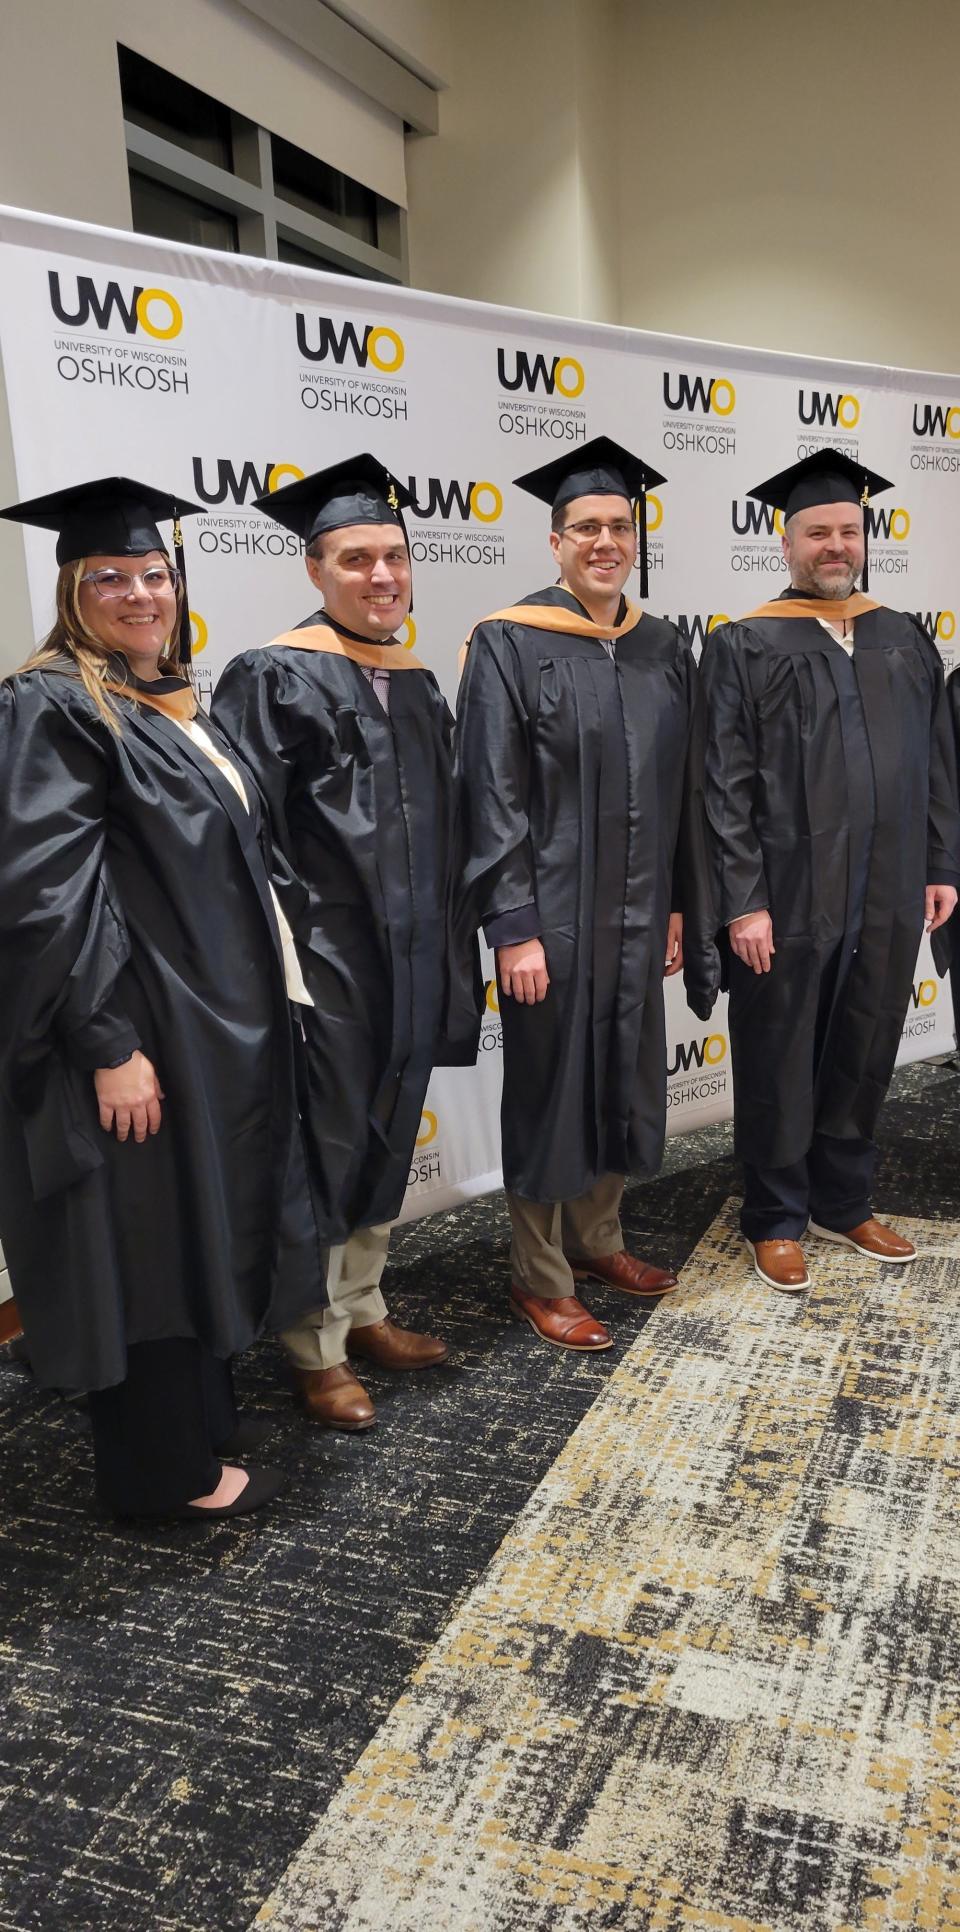 Four of the seven graduates in a cohort of UW-Oshkosh executive MBA students at graduation earlier this year. In June, they each received a $7,900 bill from the university.